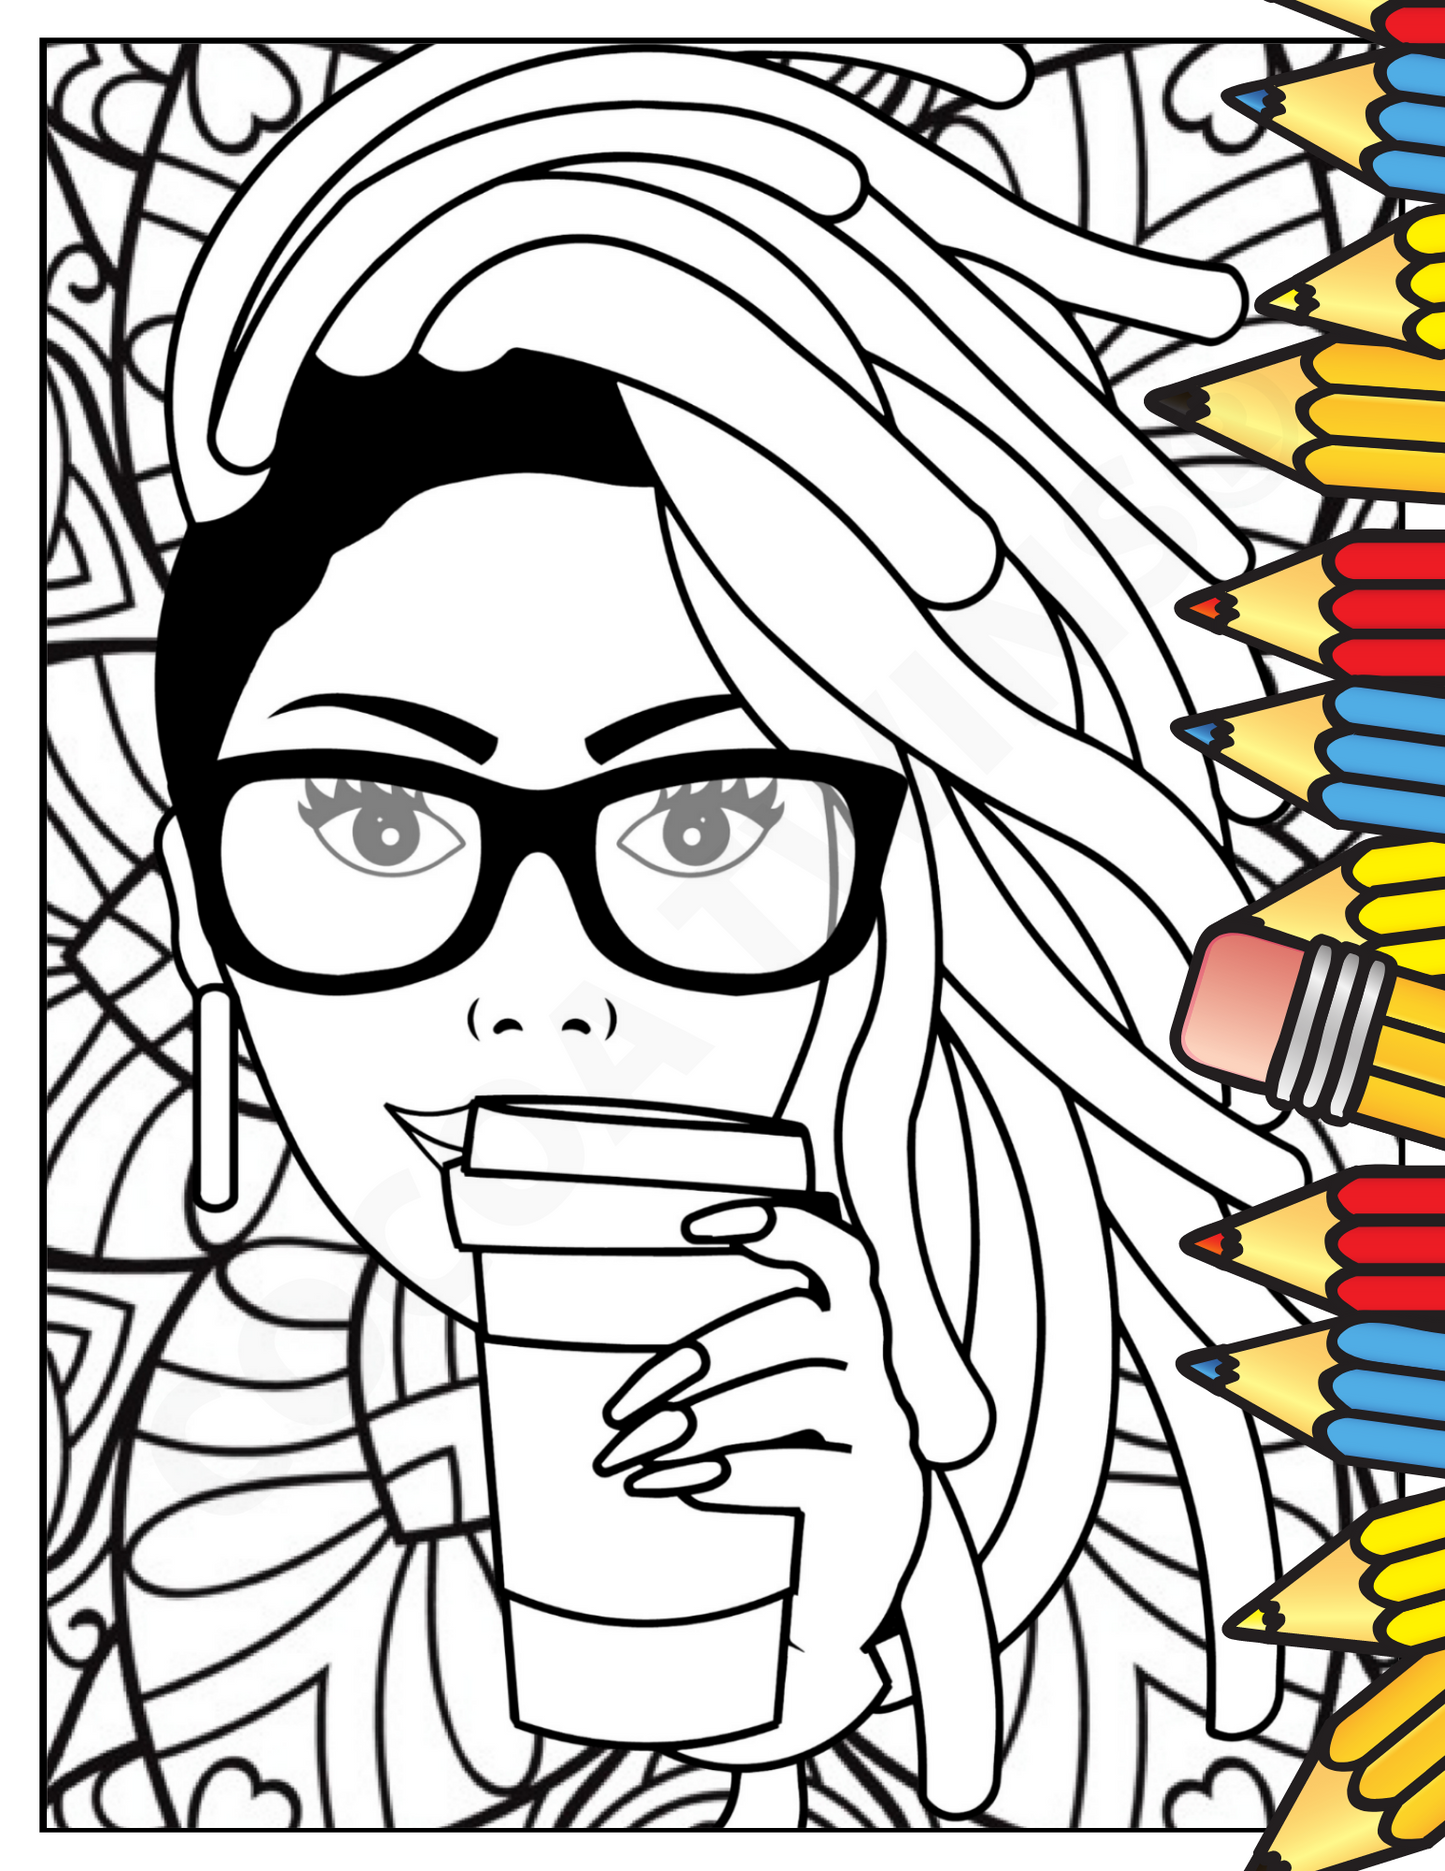 Printable Coloring Page | Avah w/ Locs and Coffee Cup | 112521-15